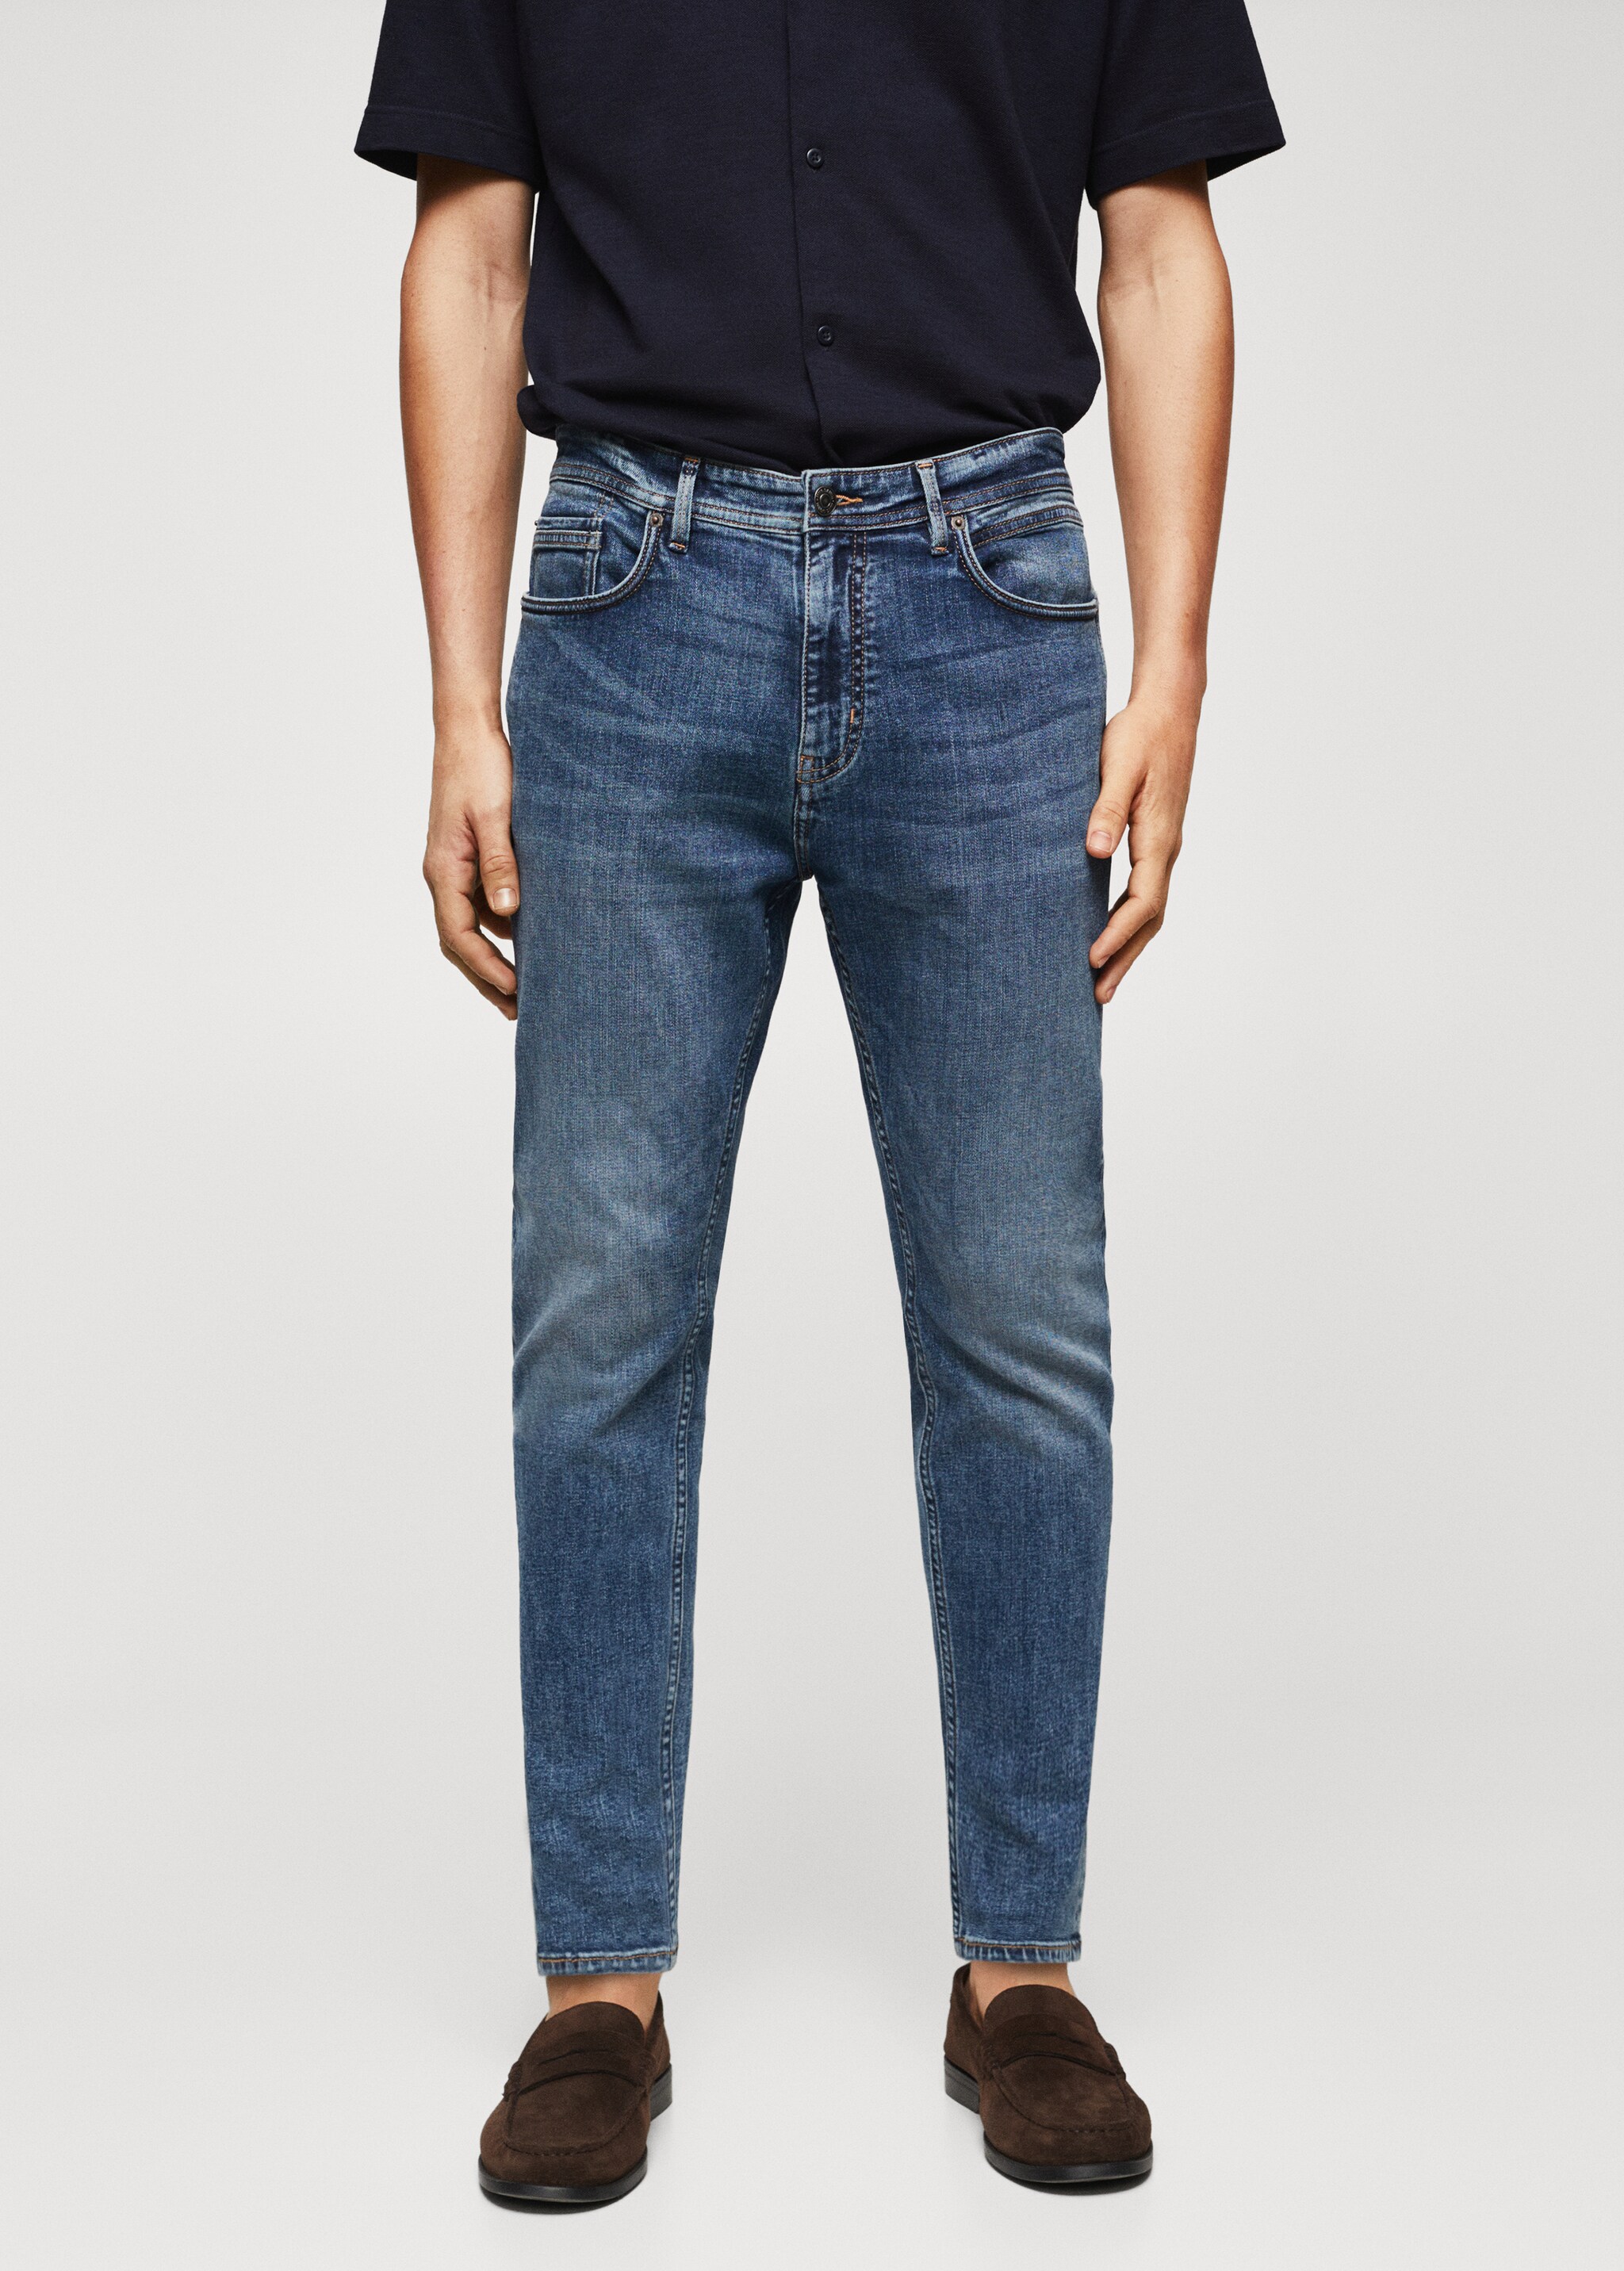 Jeans Tom tapered fit - Plano medio